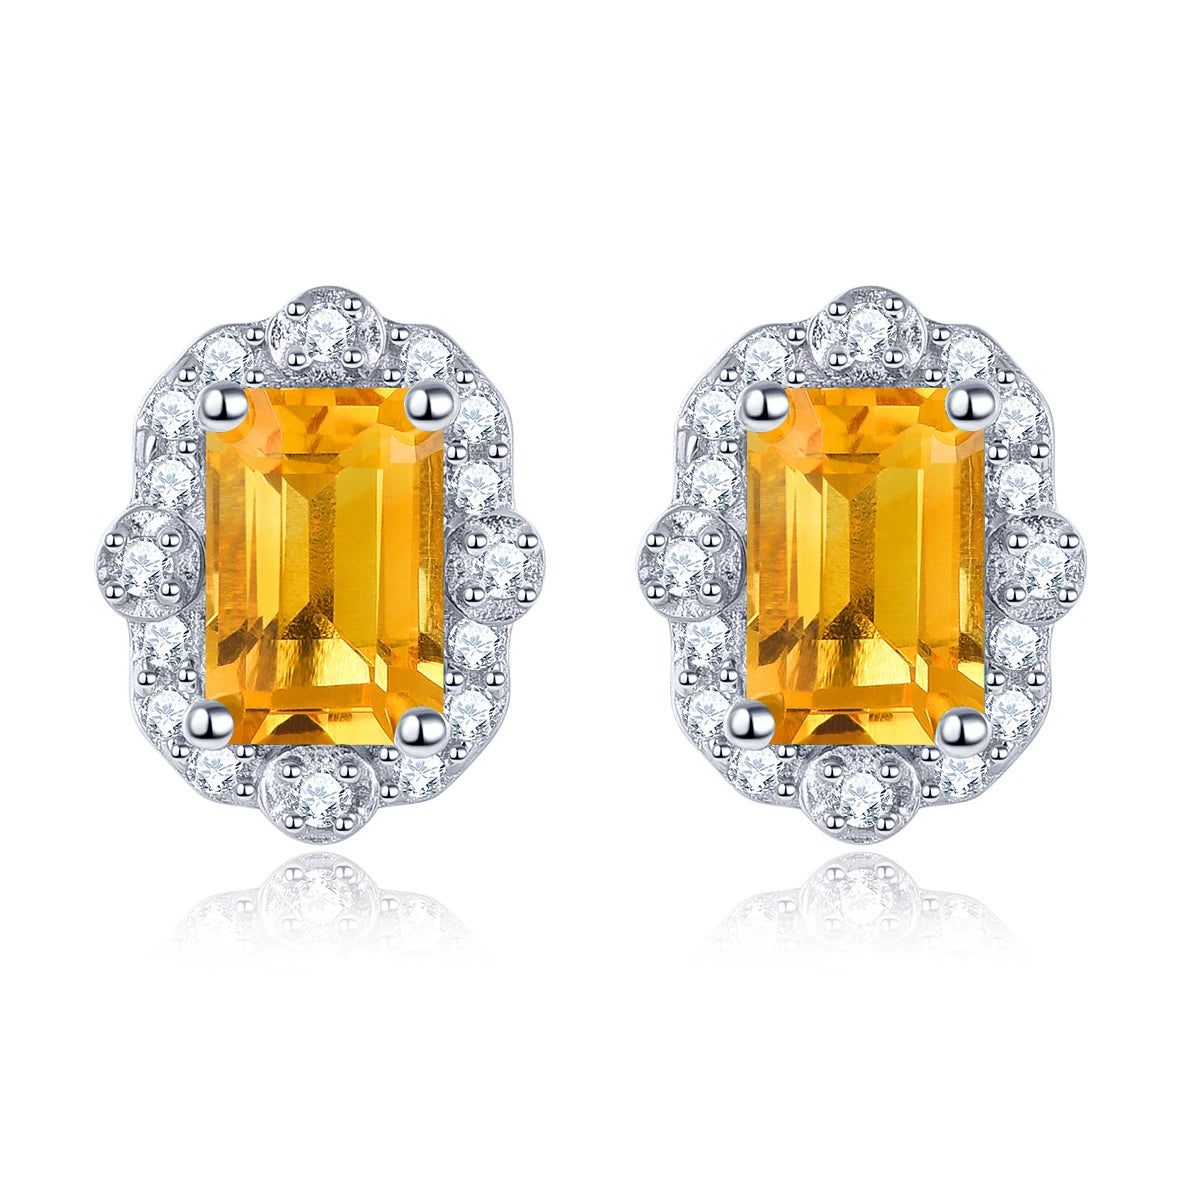 Natural Chrome Diopside Solid Silver Stud Earrings 1 Carat Octagon Cut Classic Genuine Gemstone Jewelrys Women Gifts Top Quality Natural Citrine